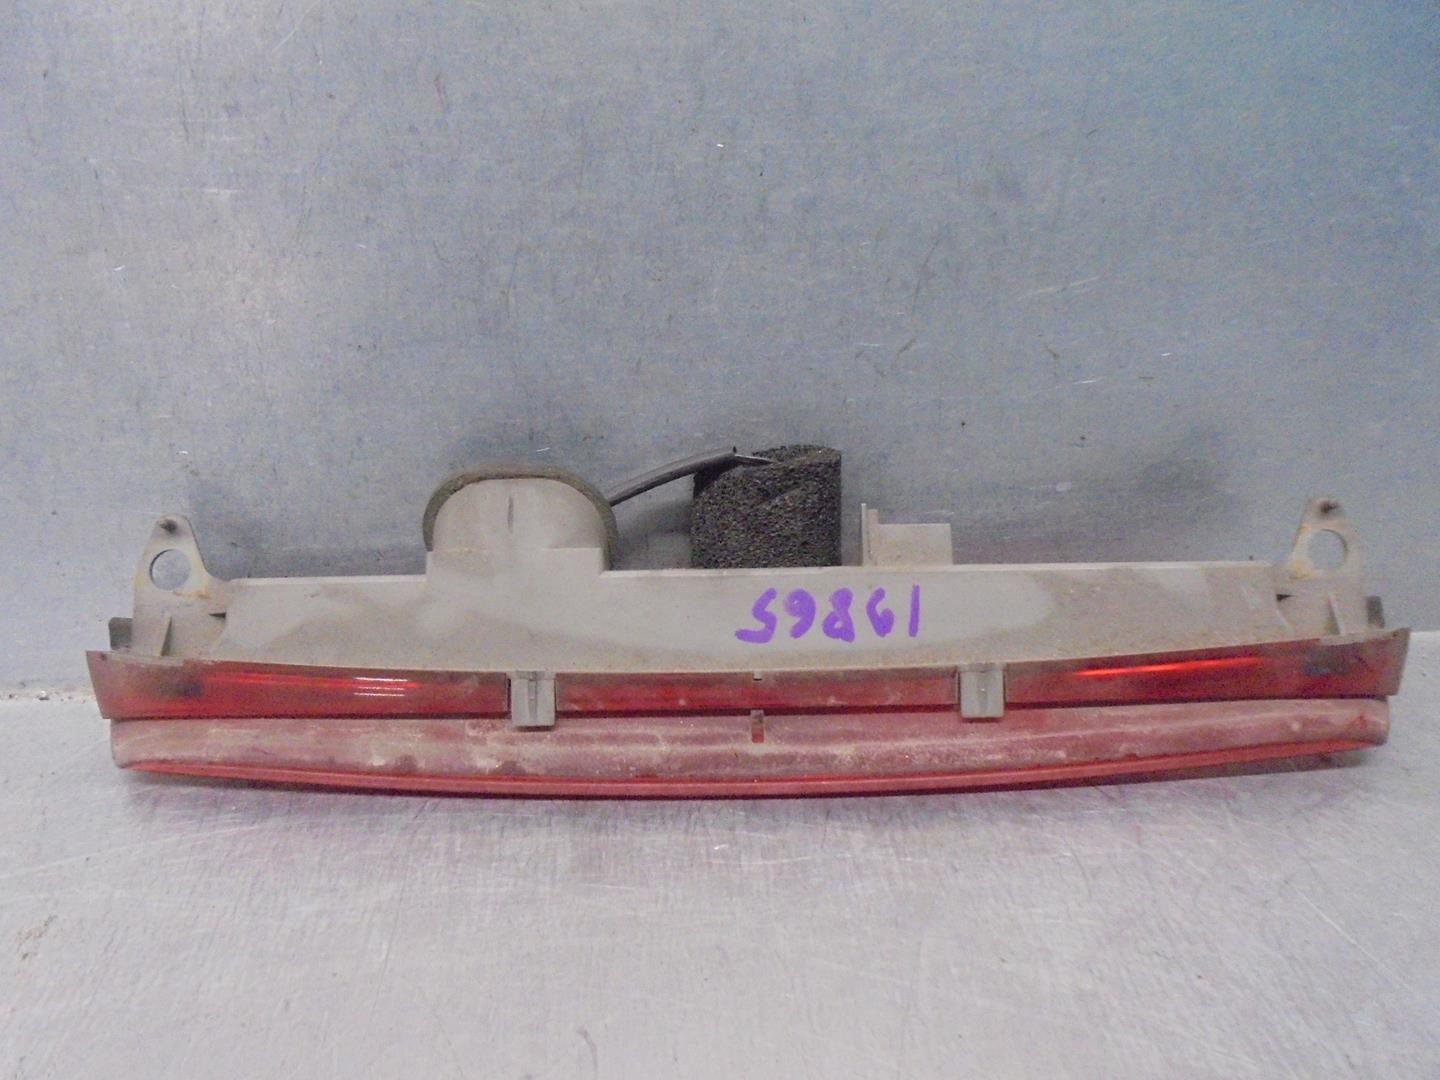 TOYOTA Avensis 2 generation (2002-2009) Rear cover light 8157005090 23755371